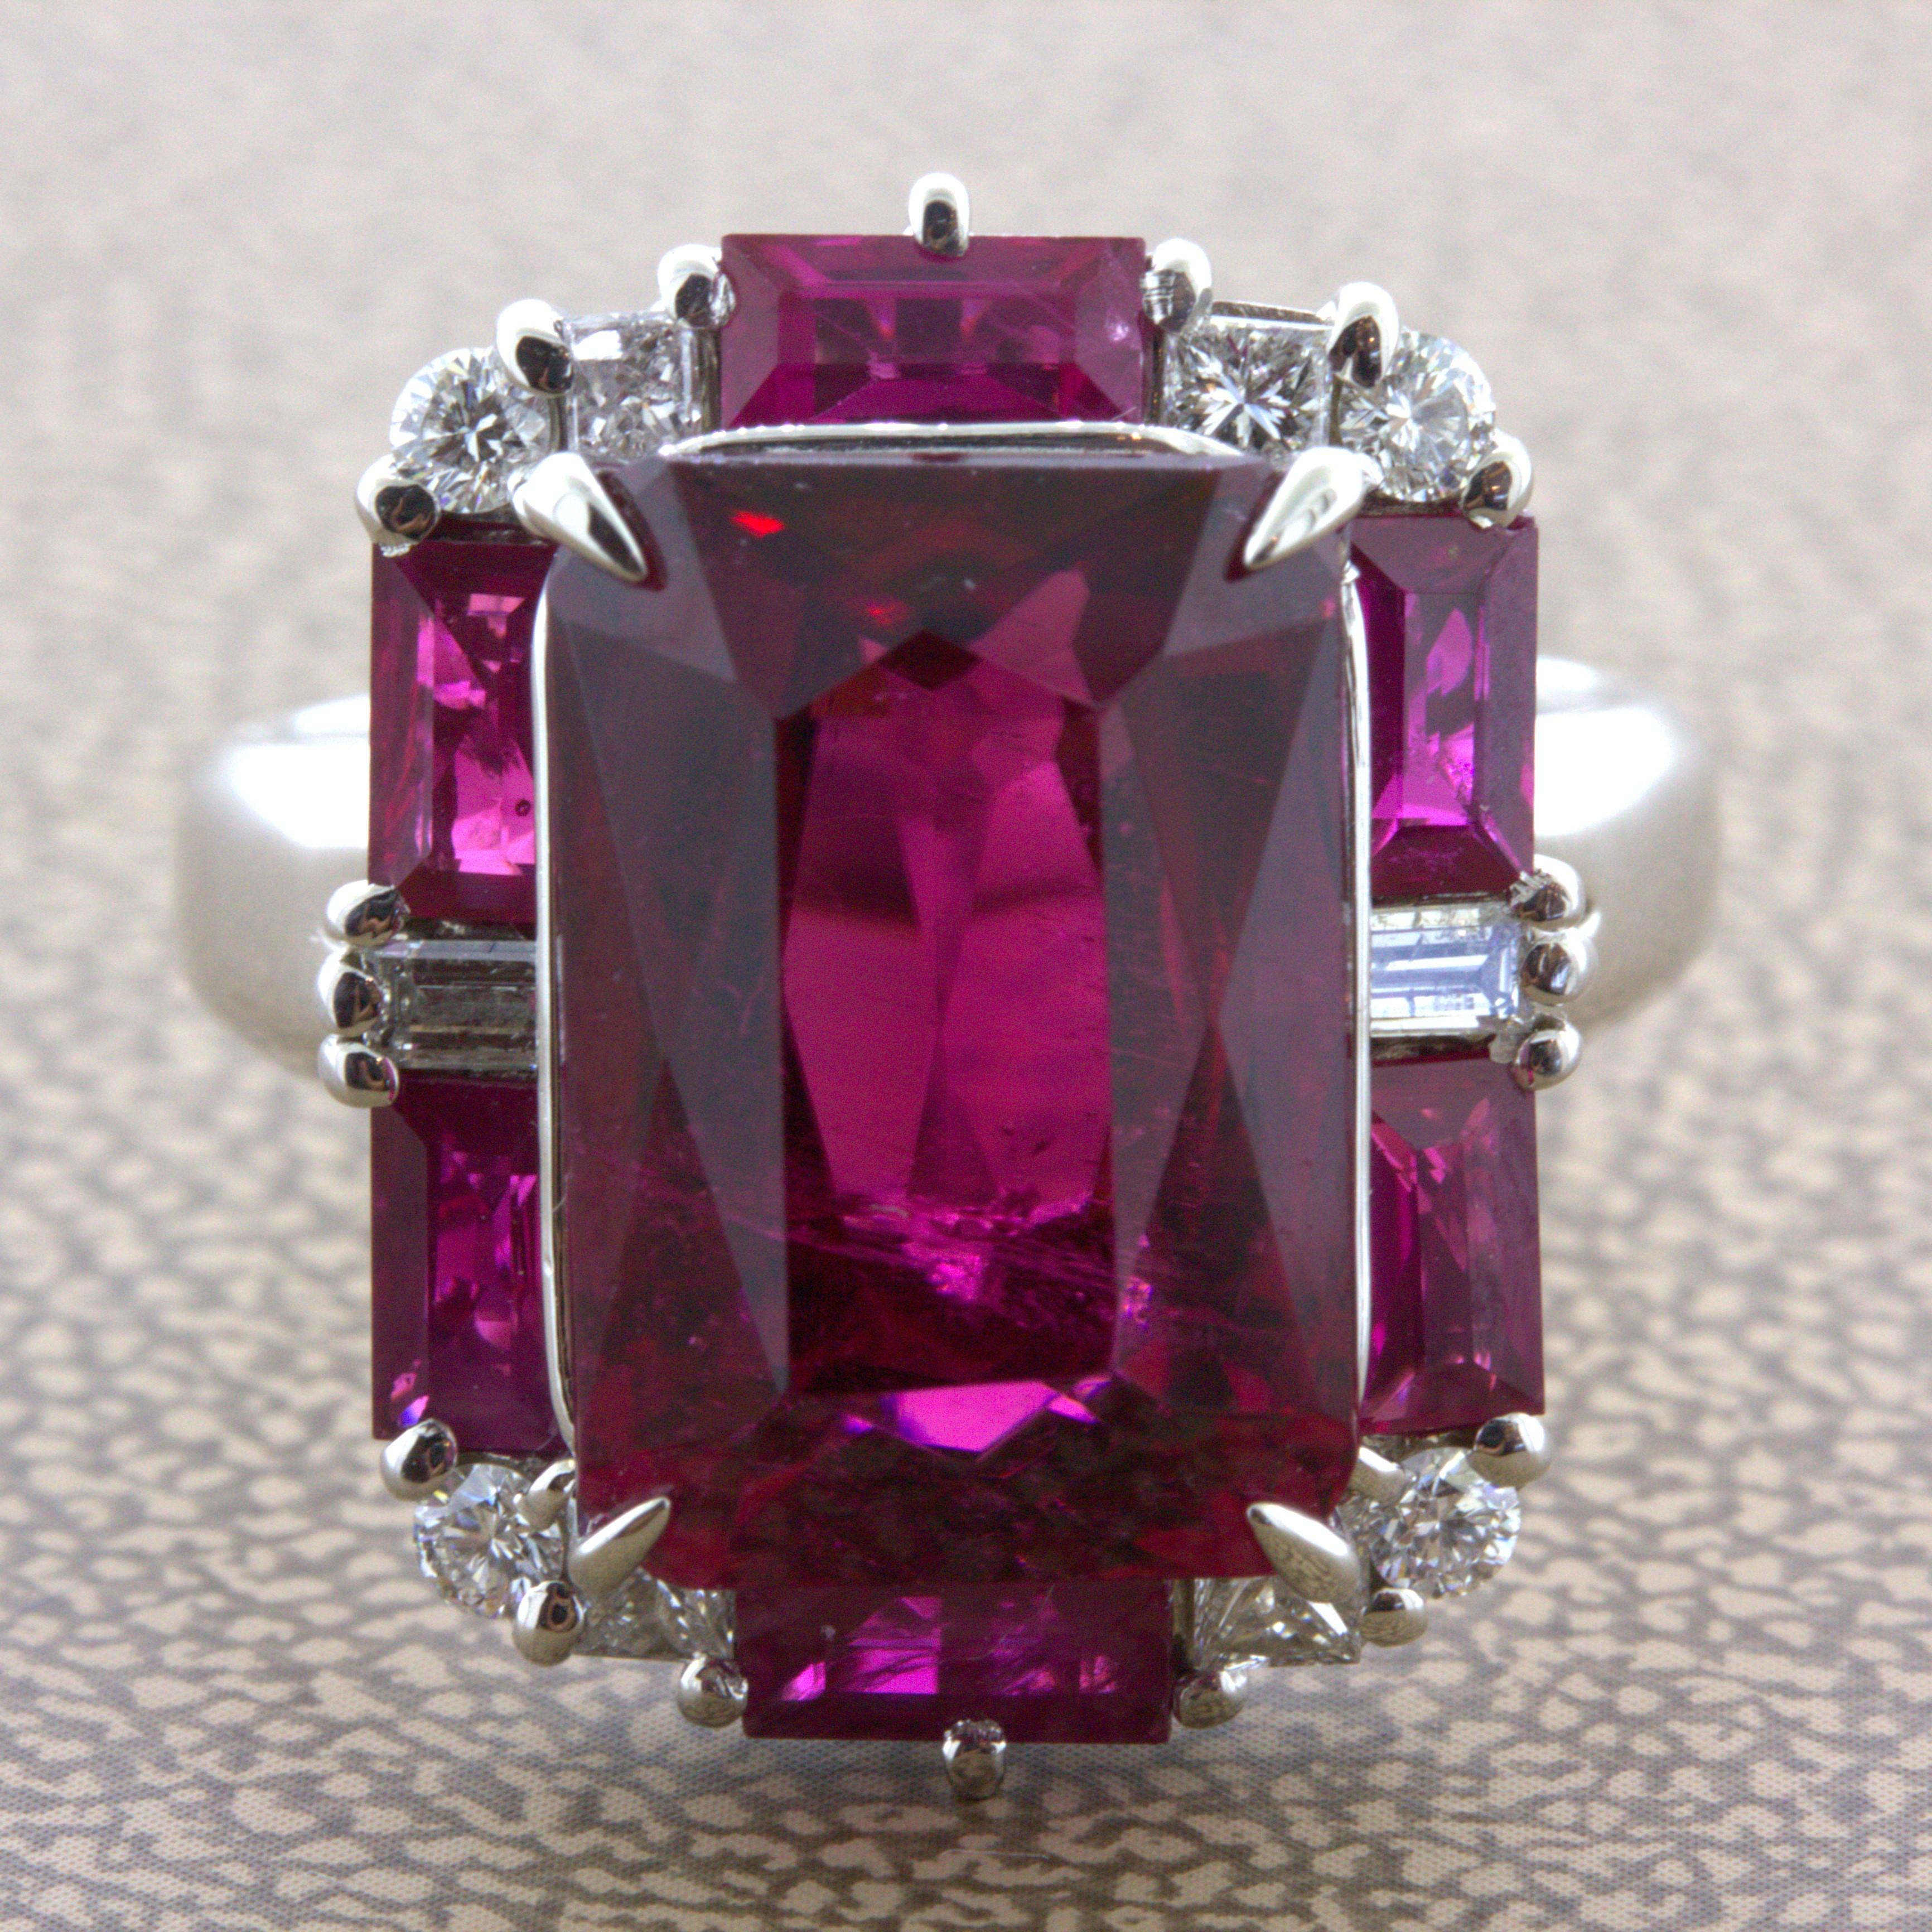 A rich cherry red rubellite takes center stage of this geometric styled piece. The center rubellite weighs 8.62 carats, has superb vivid color, and a sleek emerald-cut shape. It is complemented by a border of diamonds, 0.43 carats, and additional